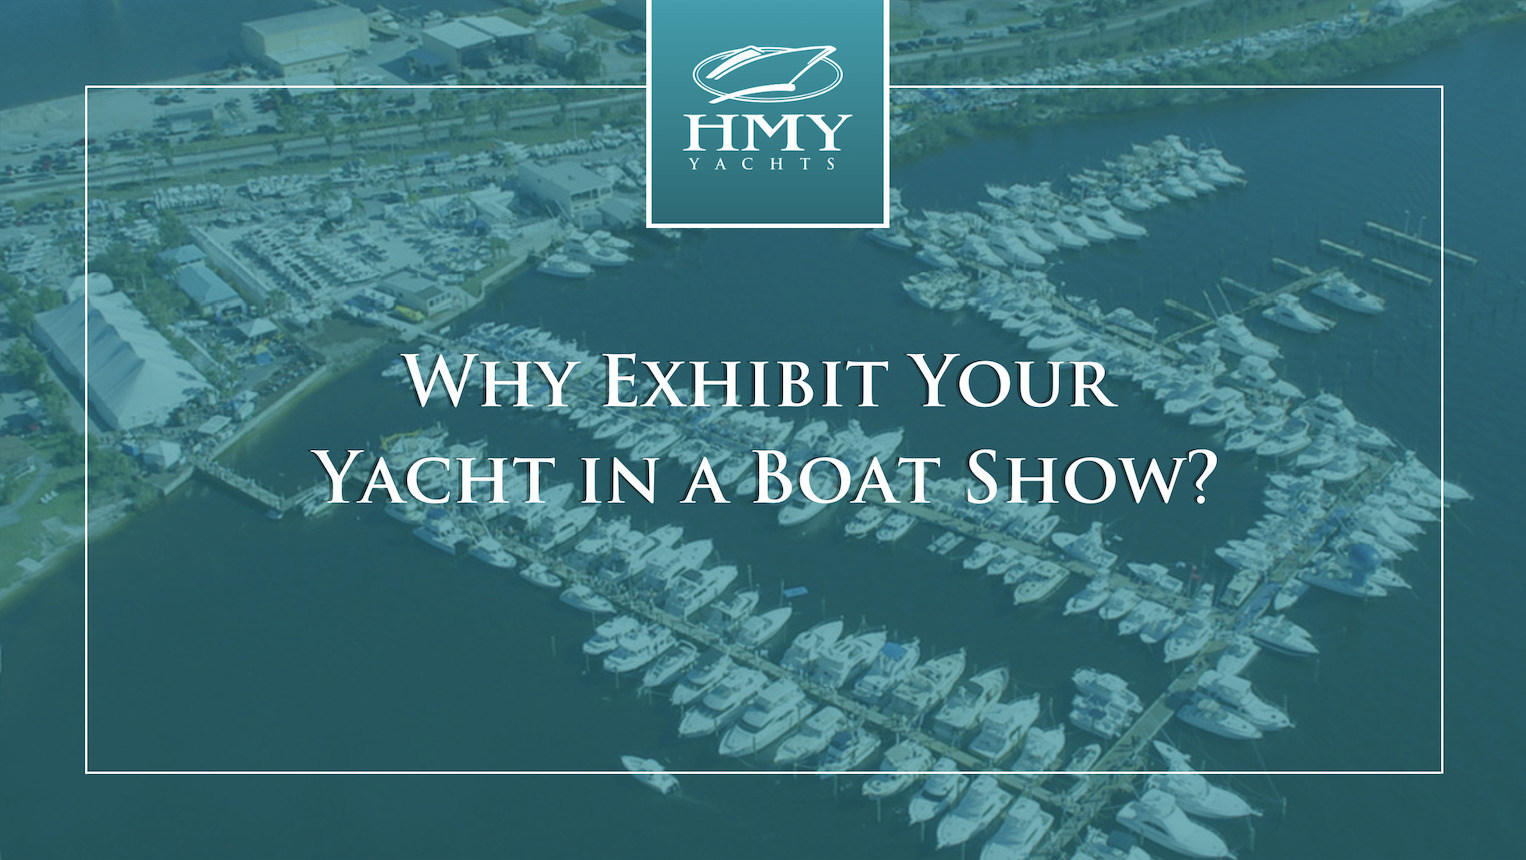 Why Exhibit Your Yacht in a Boat Show with HMY Yacht Sales?